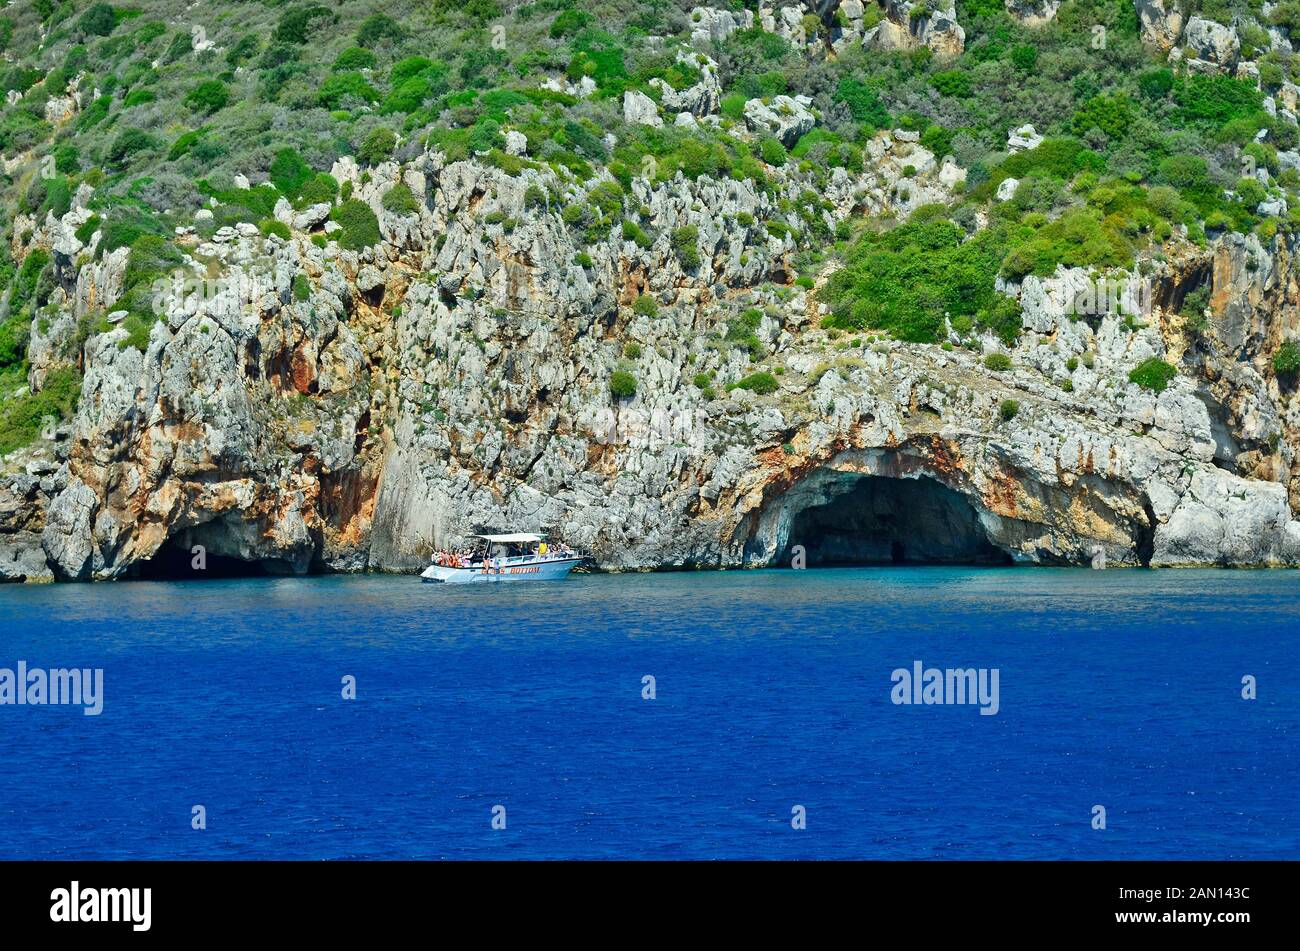 Zakynthos, Greece - May 25th 2016: Unidentified people, excursion boat and natural cave on eastern coast of the island in Ionean sea Stock Photo